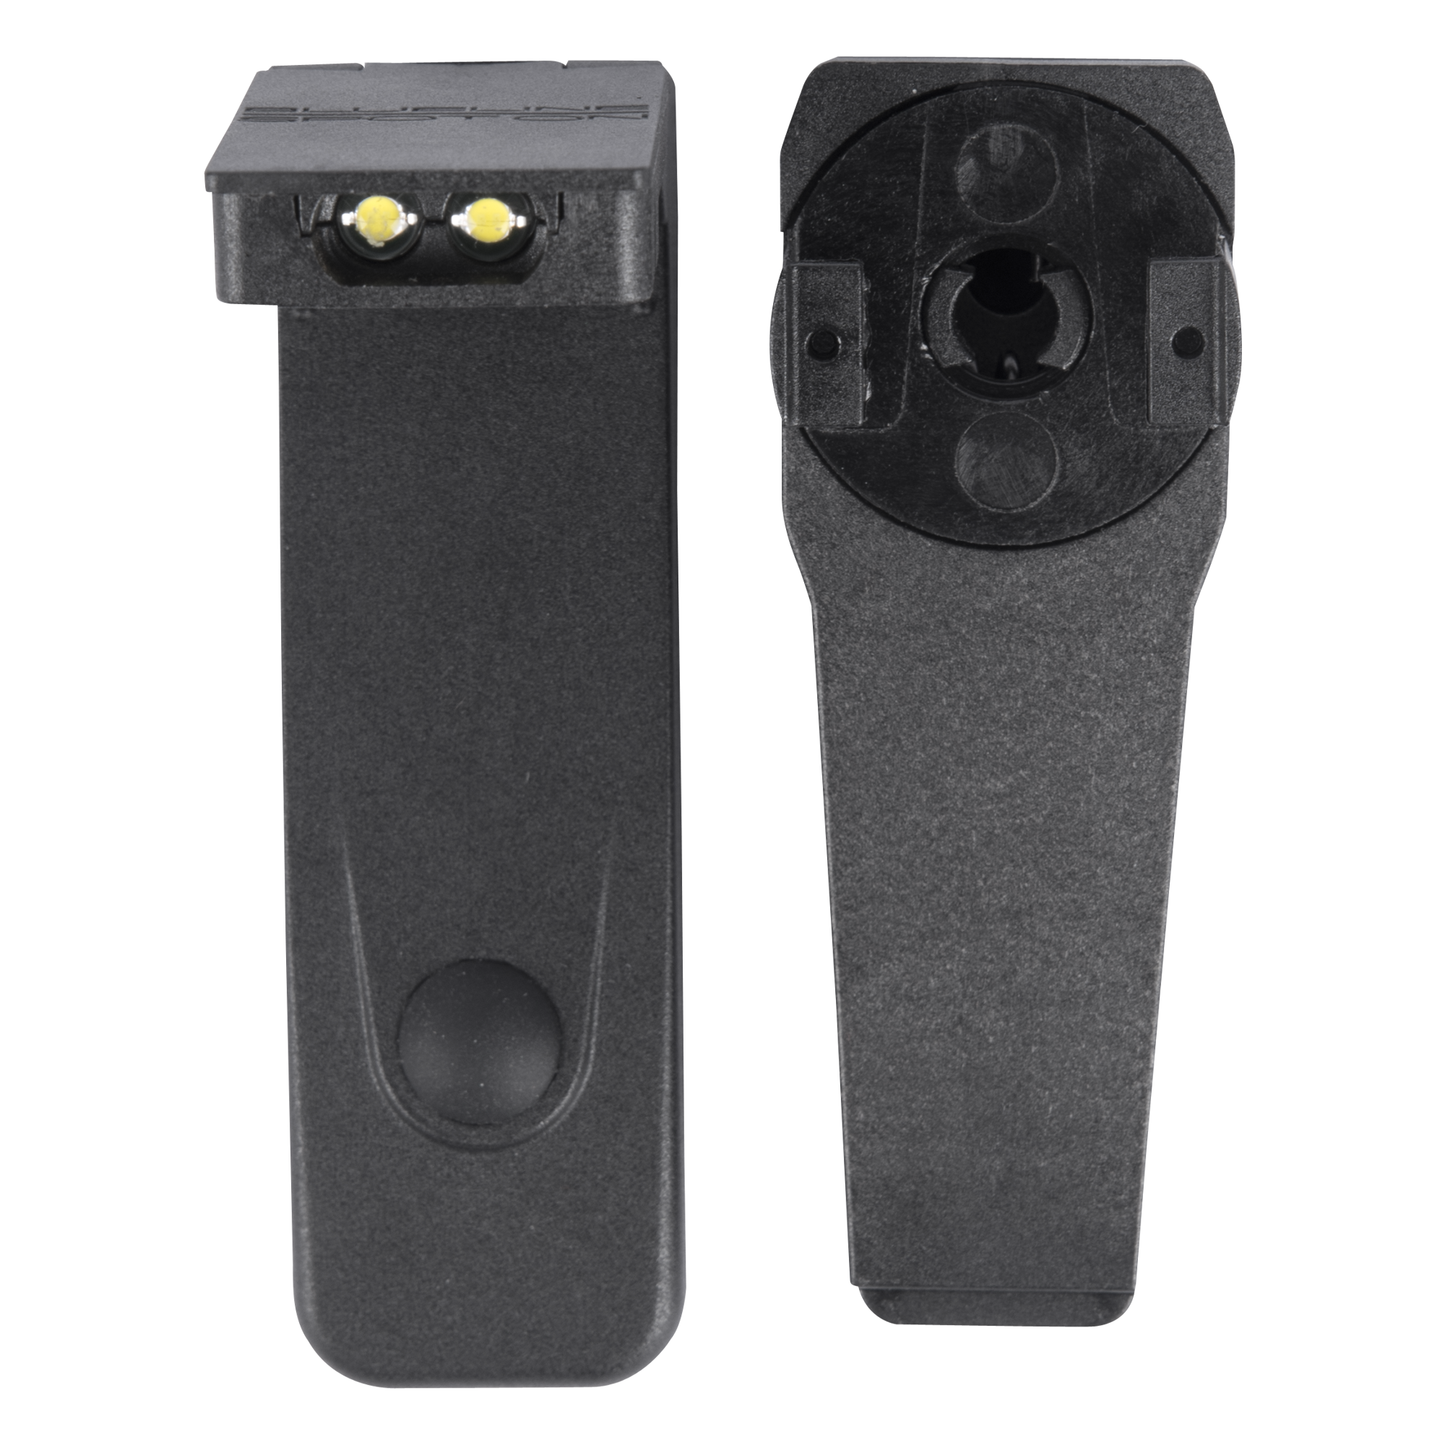 Clip-on Torch With Dual LED - Black